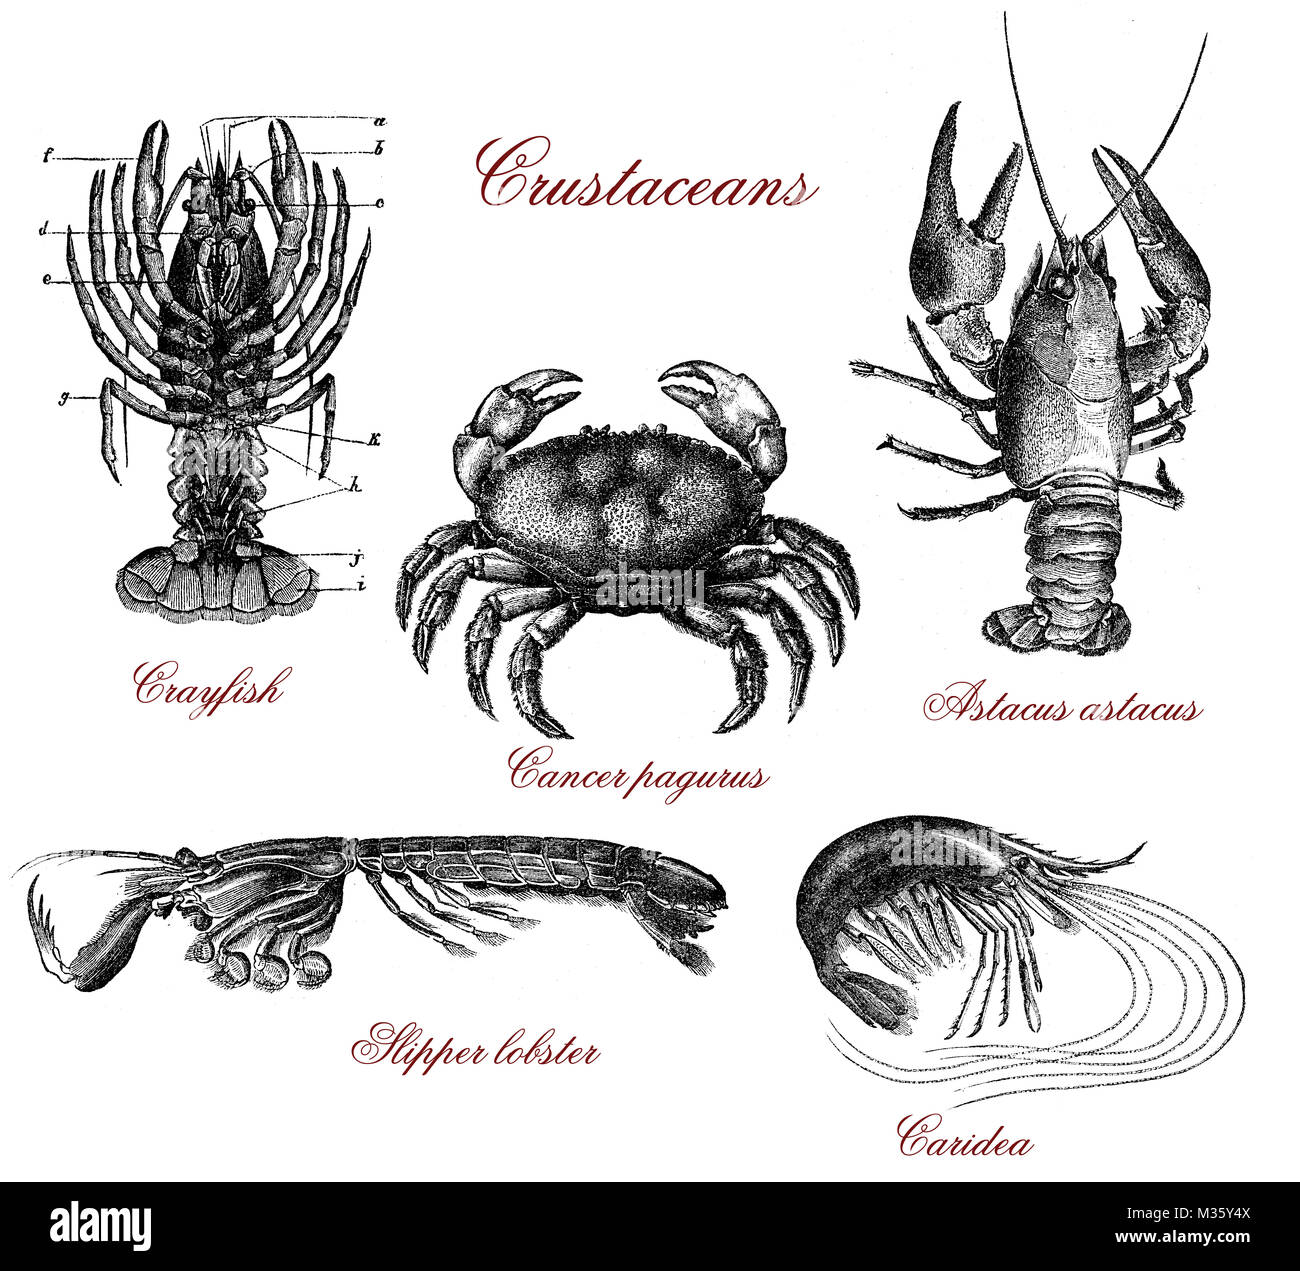 Vintage crustacean illustrated table with crayfish, lobster,crab and shrimps Stock Photo